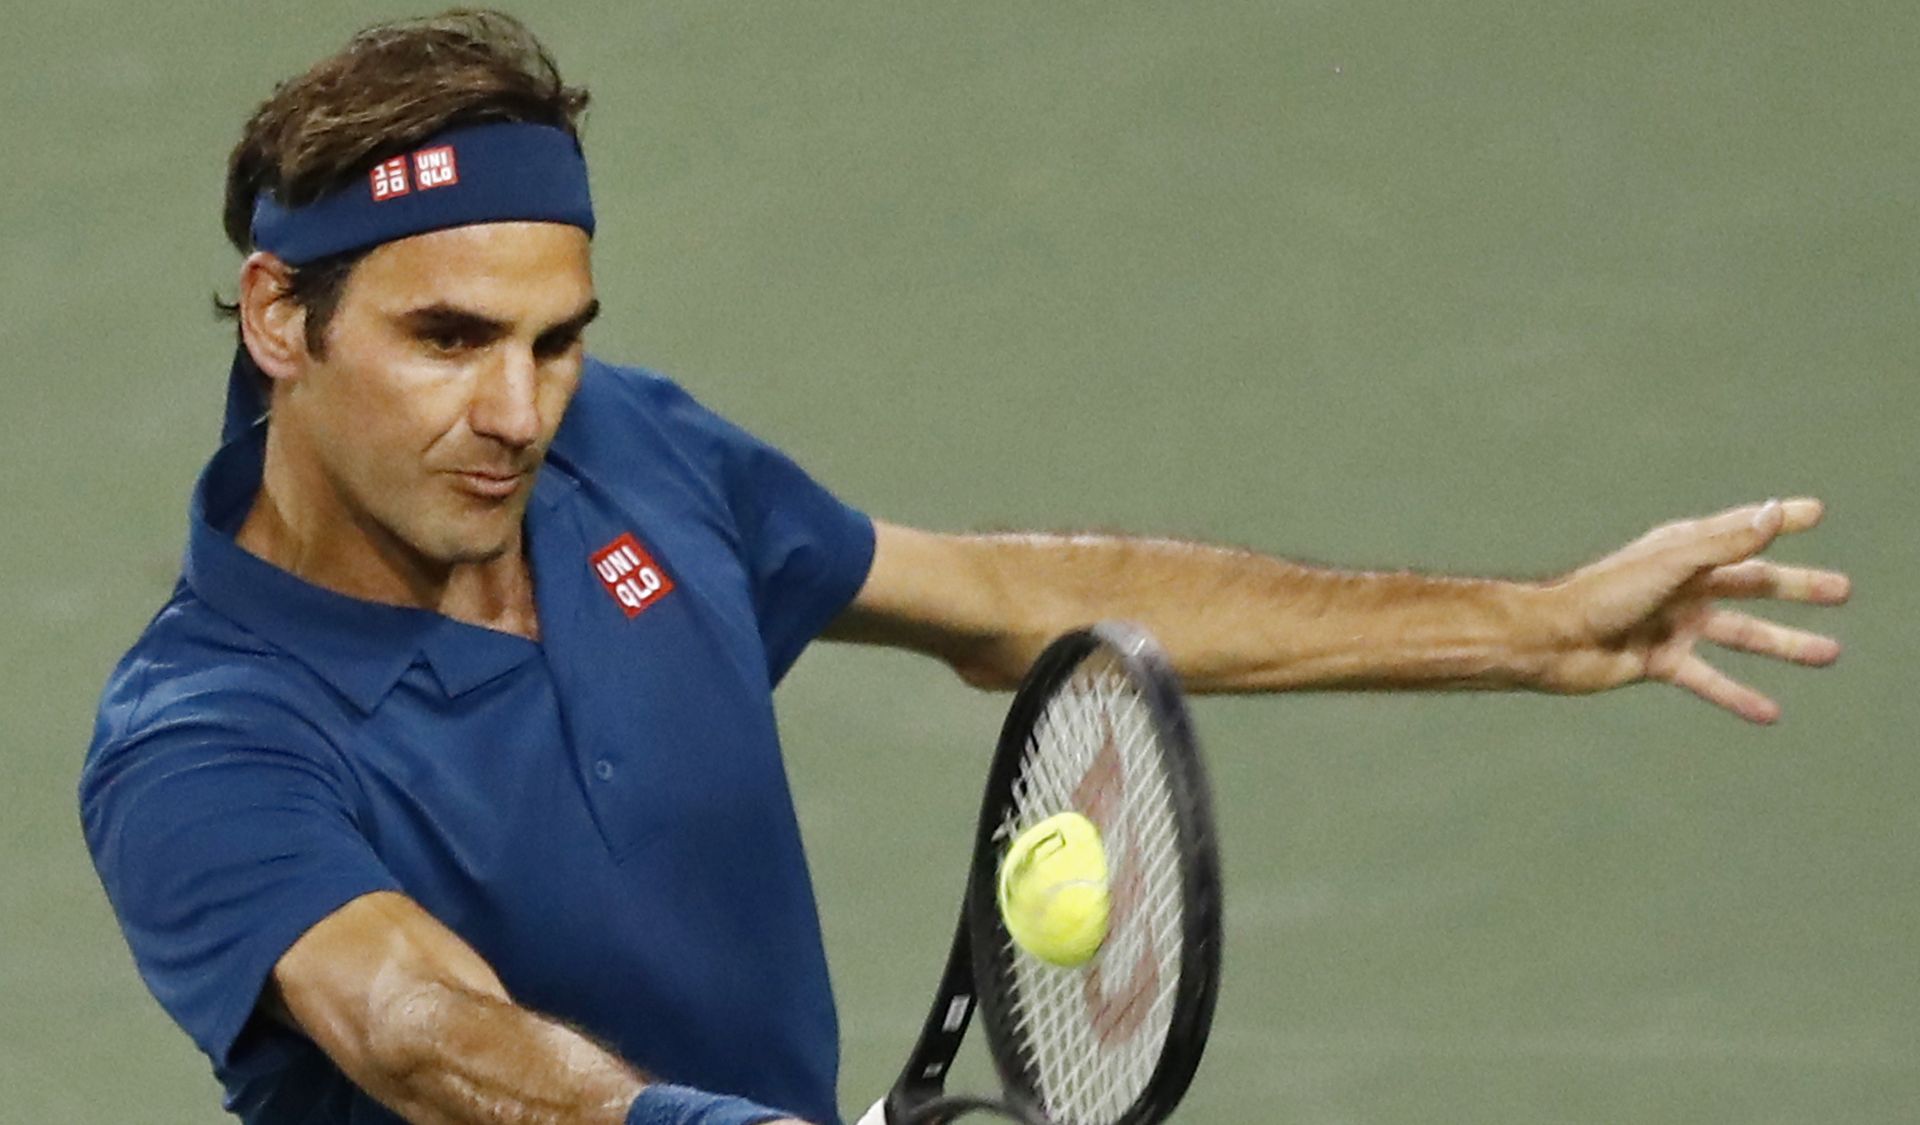 epa07432777 Roger Federer of Switzerland in action against Stan Wawrinka of Switzerland during the BNP Paribas Open tennis tournament at the Indian Wells Tennis Garden in Indian Wells, California, USA, 12 March 2019. The men's and women's final will be played, 17 March 2019.  EPA/LARRY W. SMITH